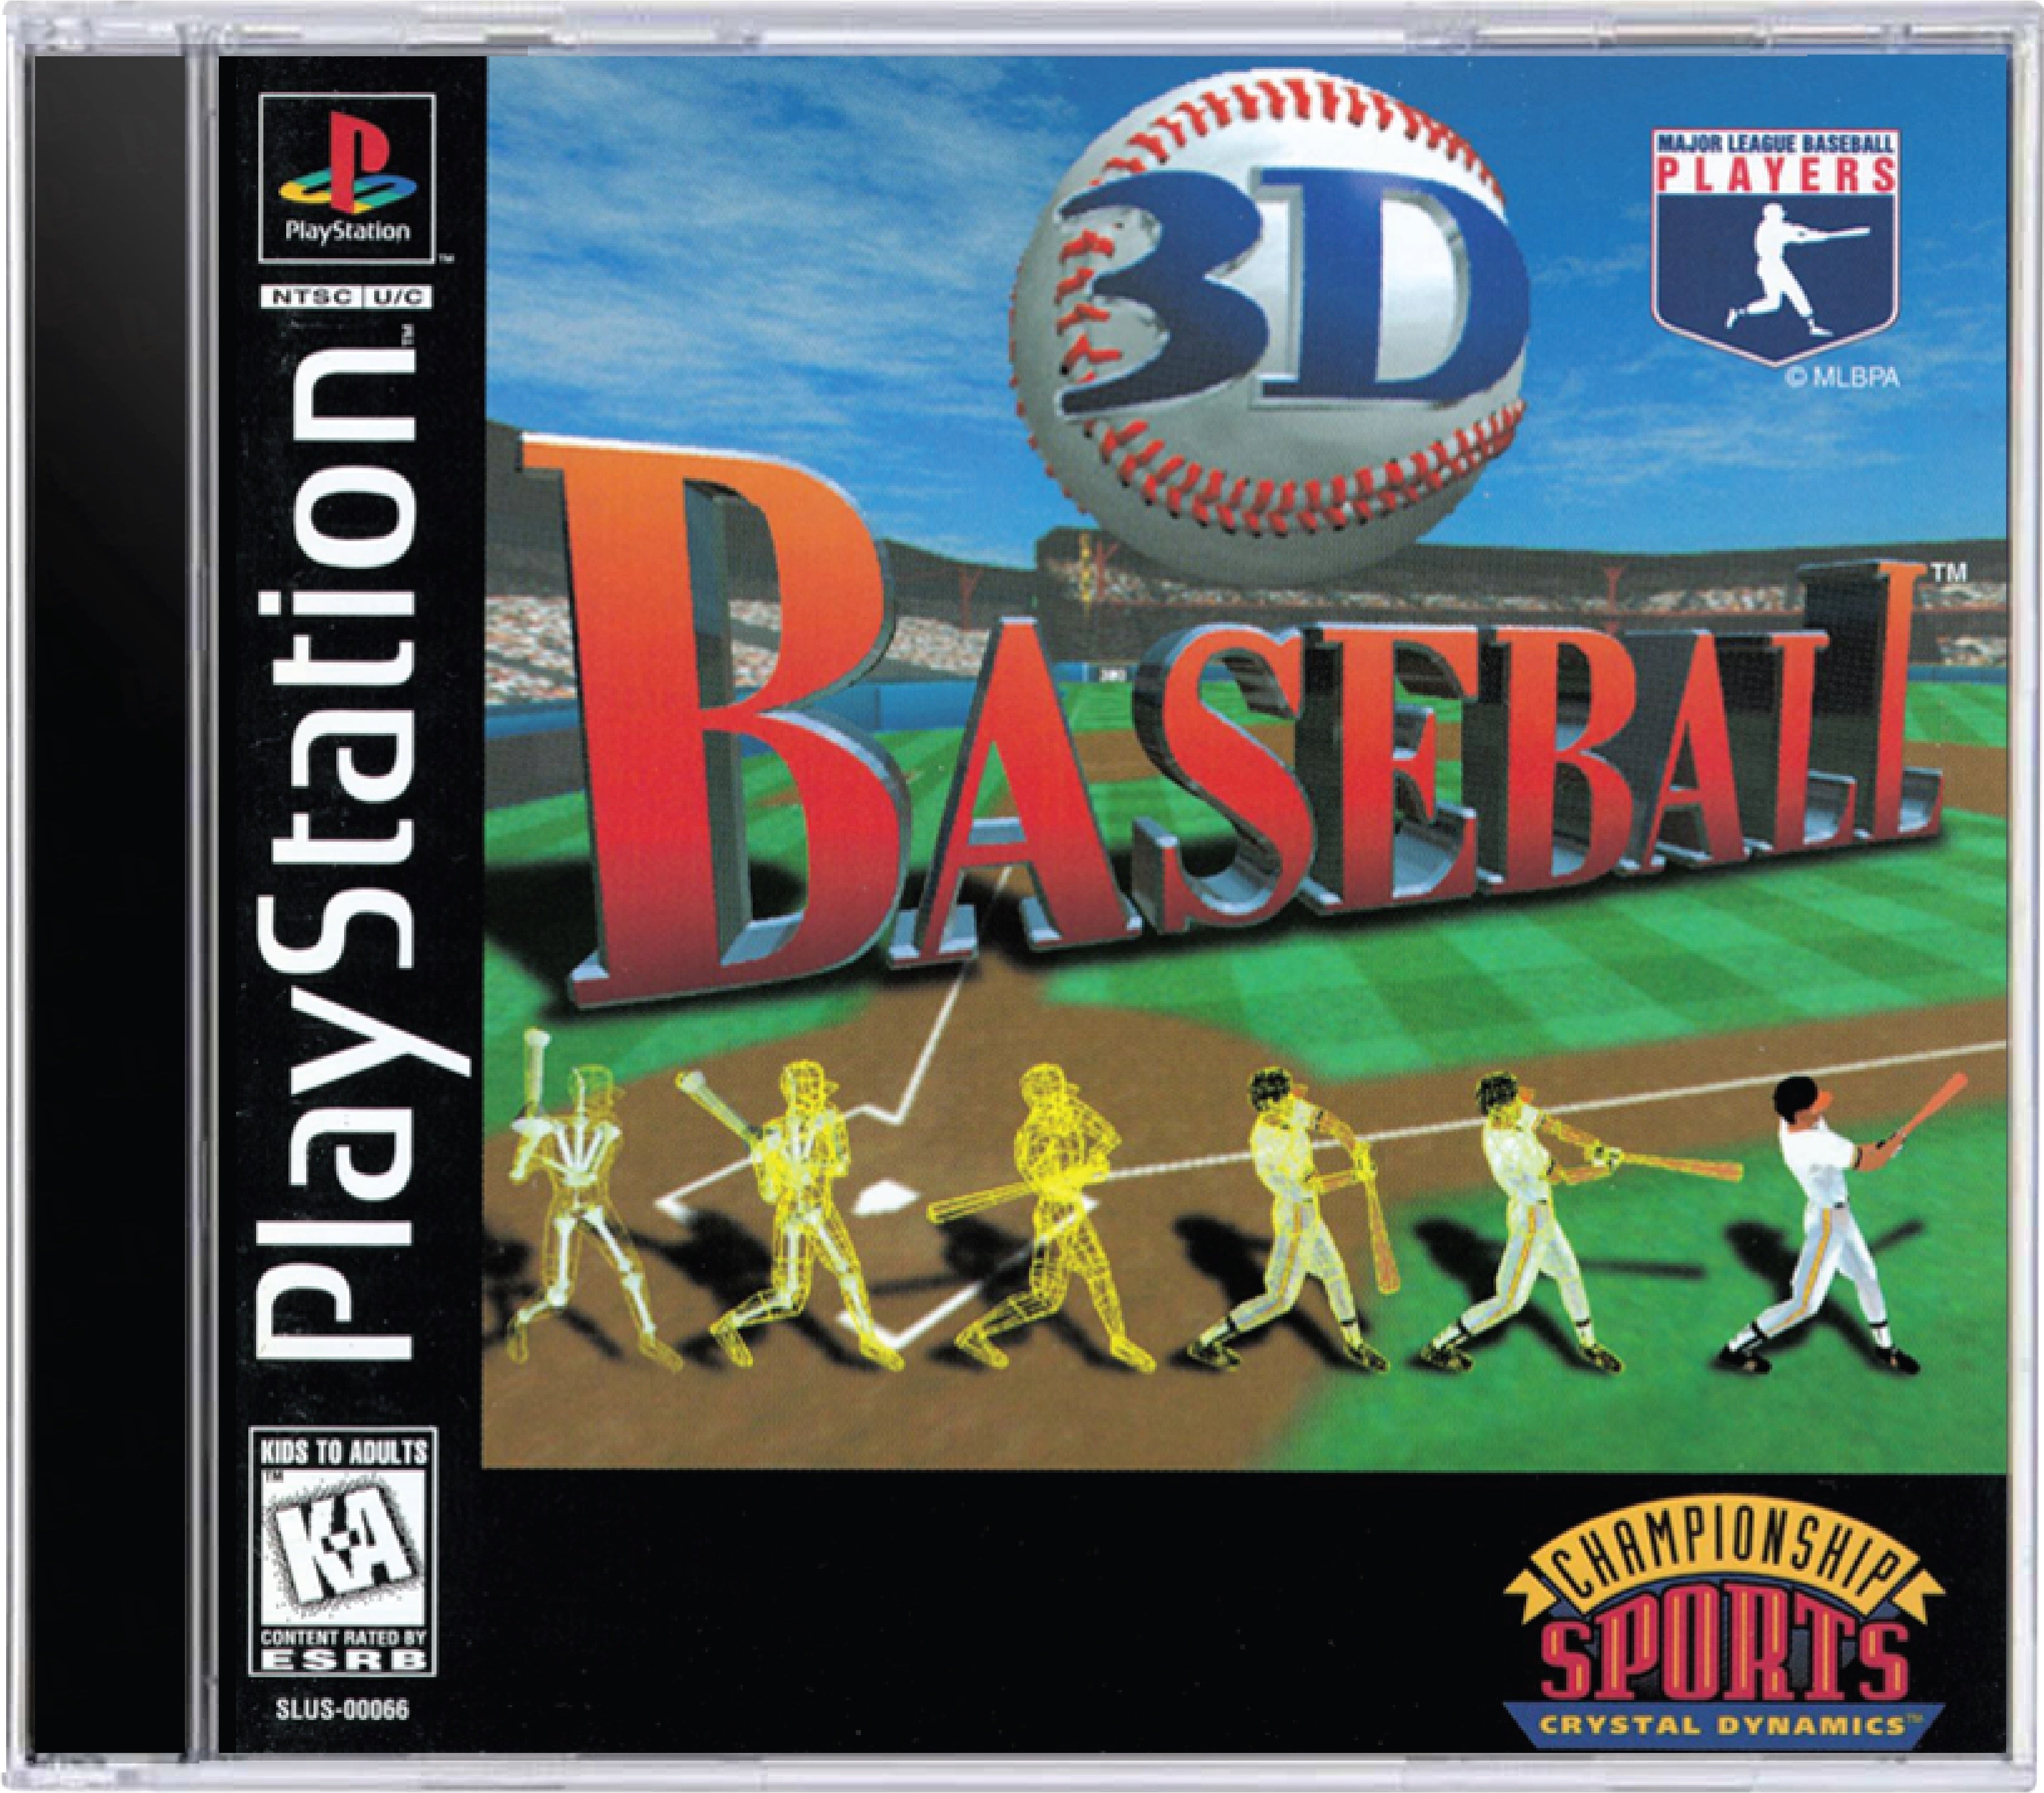 3D Baseball Cover Art and Product Photo